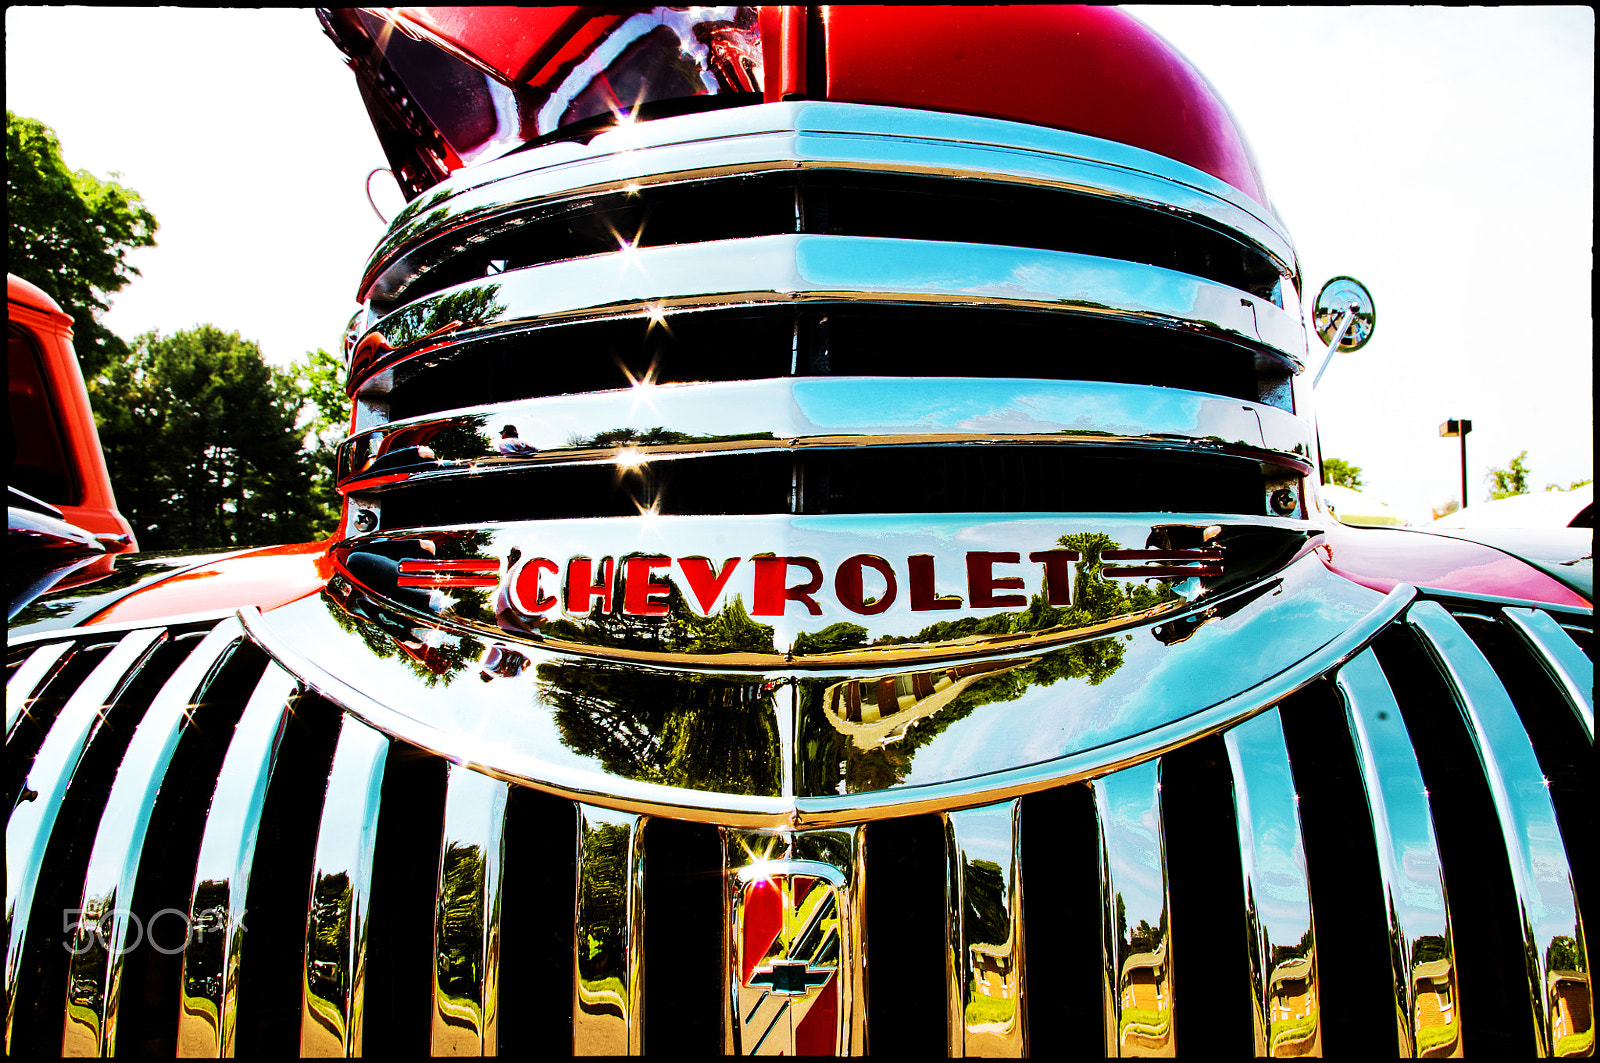 Pentax K-x sample photo. A beautiful, old chevrolet grille from a pick up truck photography